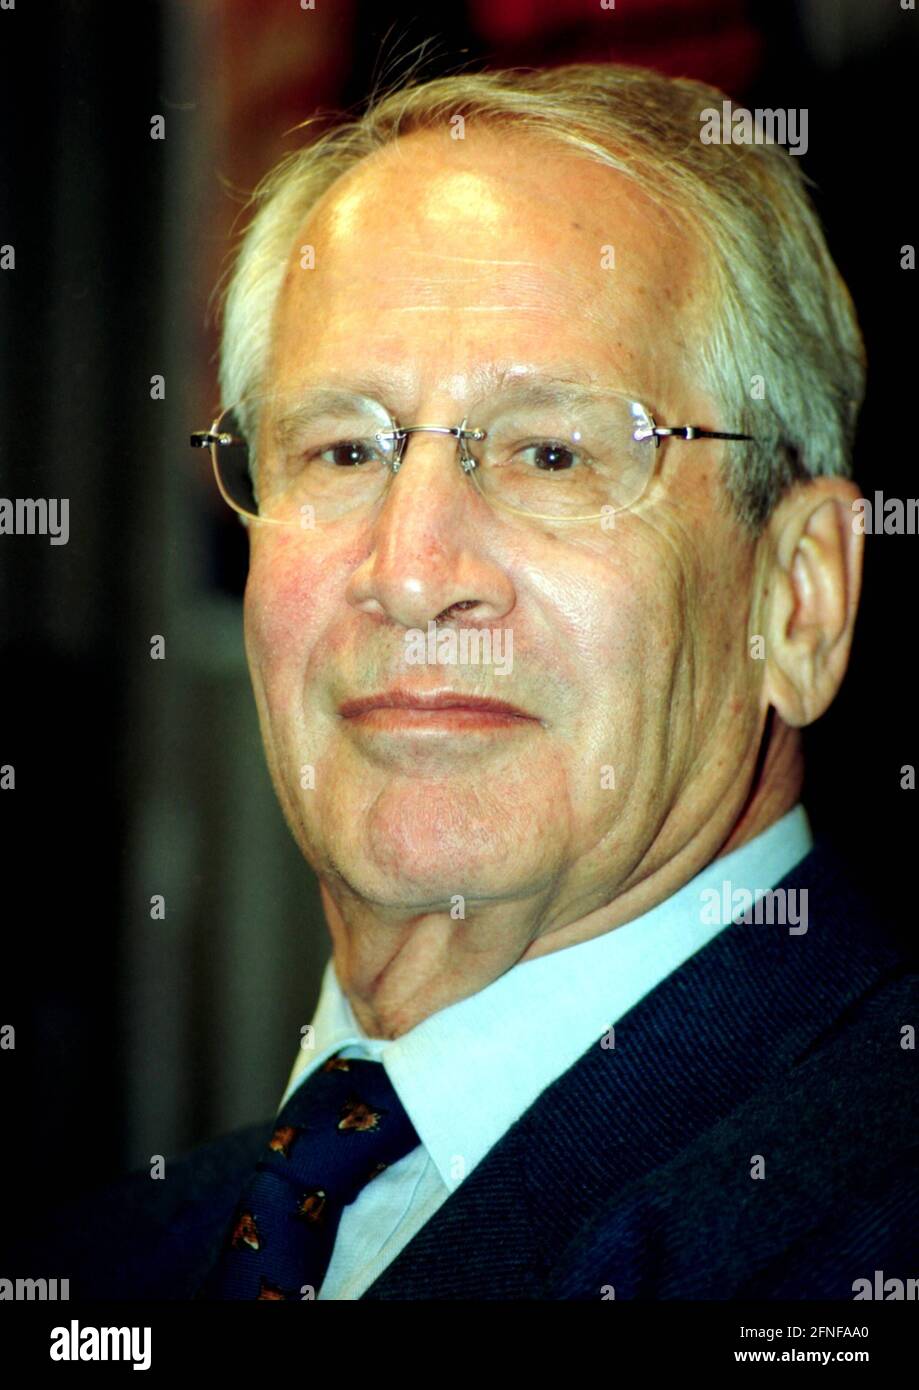 Date of recording: 02.06.1997 Markus Wolf - 19.01.1923 - 09.11.2006 Chief of the GDR foreign espionage from 1952 to 1986 as head of the HVA of the MfS in the rank of a colonel general and deputy minister for state security, at the presentation of his book 'Spionage Chief in the Cold War' on 2 June 1997 in Berlin at the Theater am Schiffbauerdamm [automated translation] Stock Photo